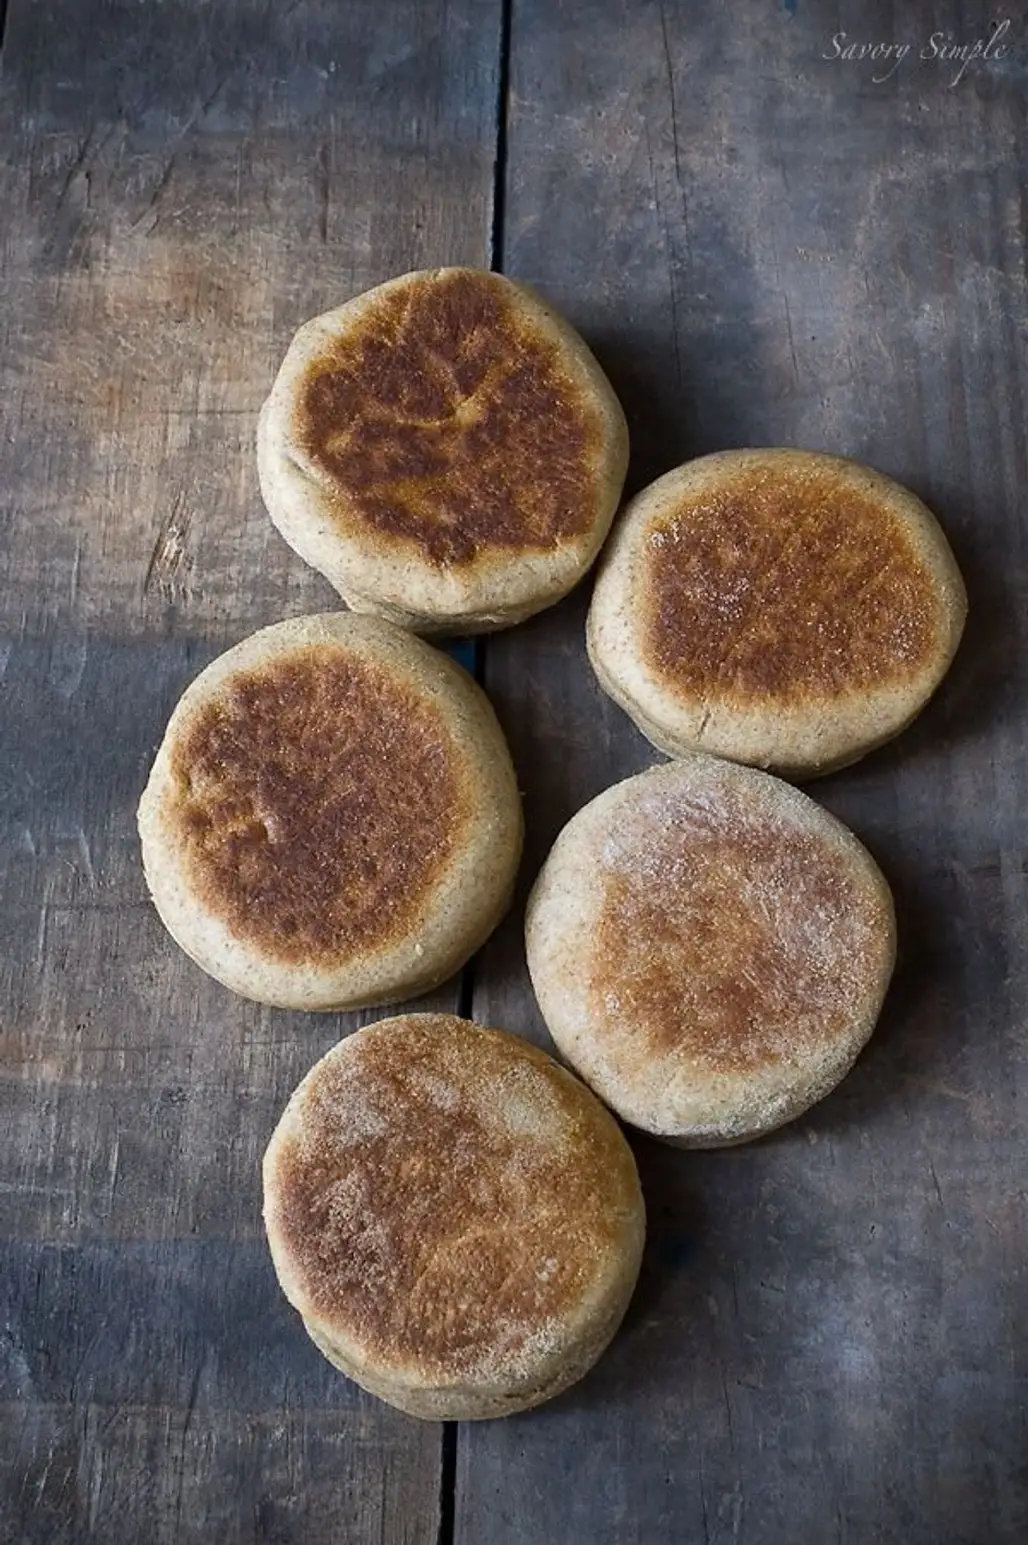 Have an English Muffin Instead of a Bagel